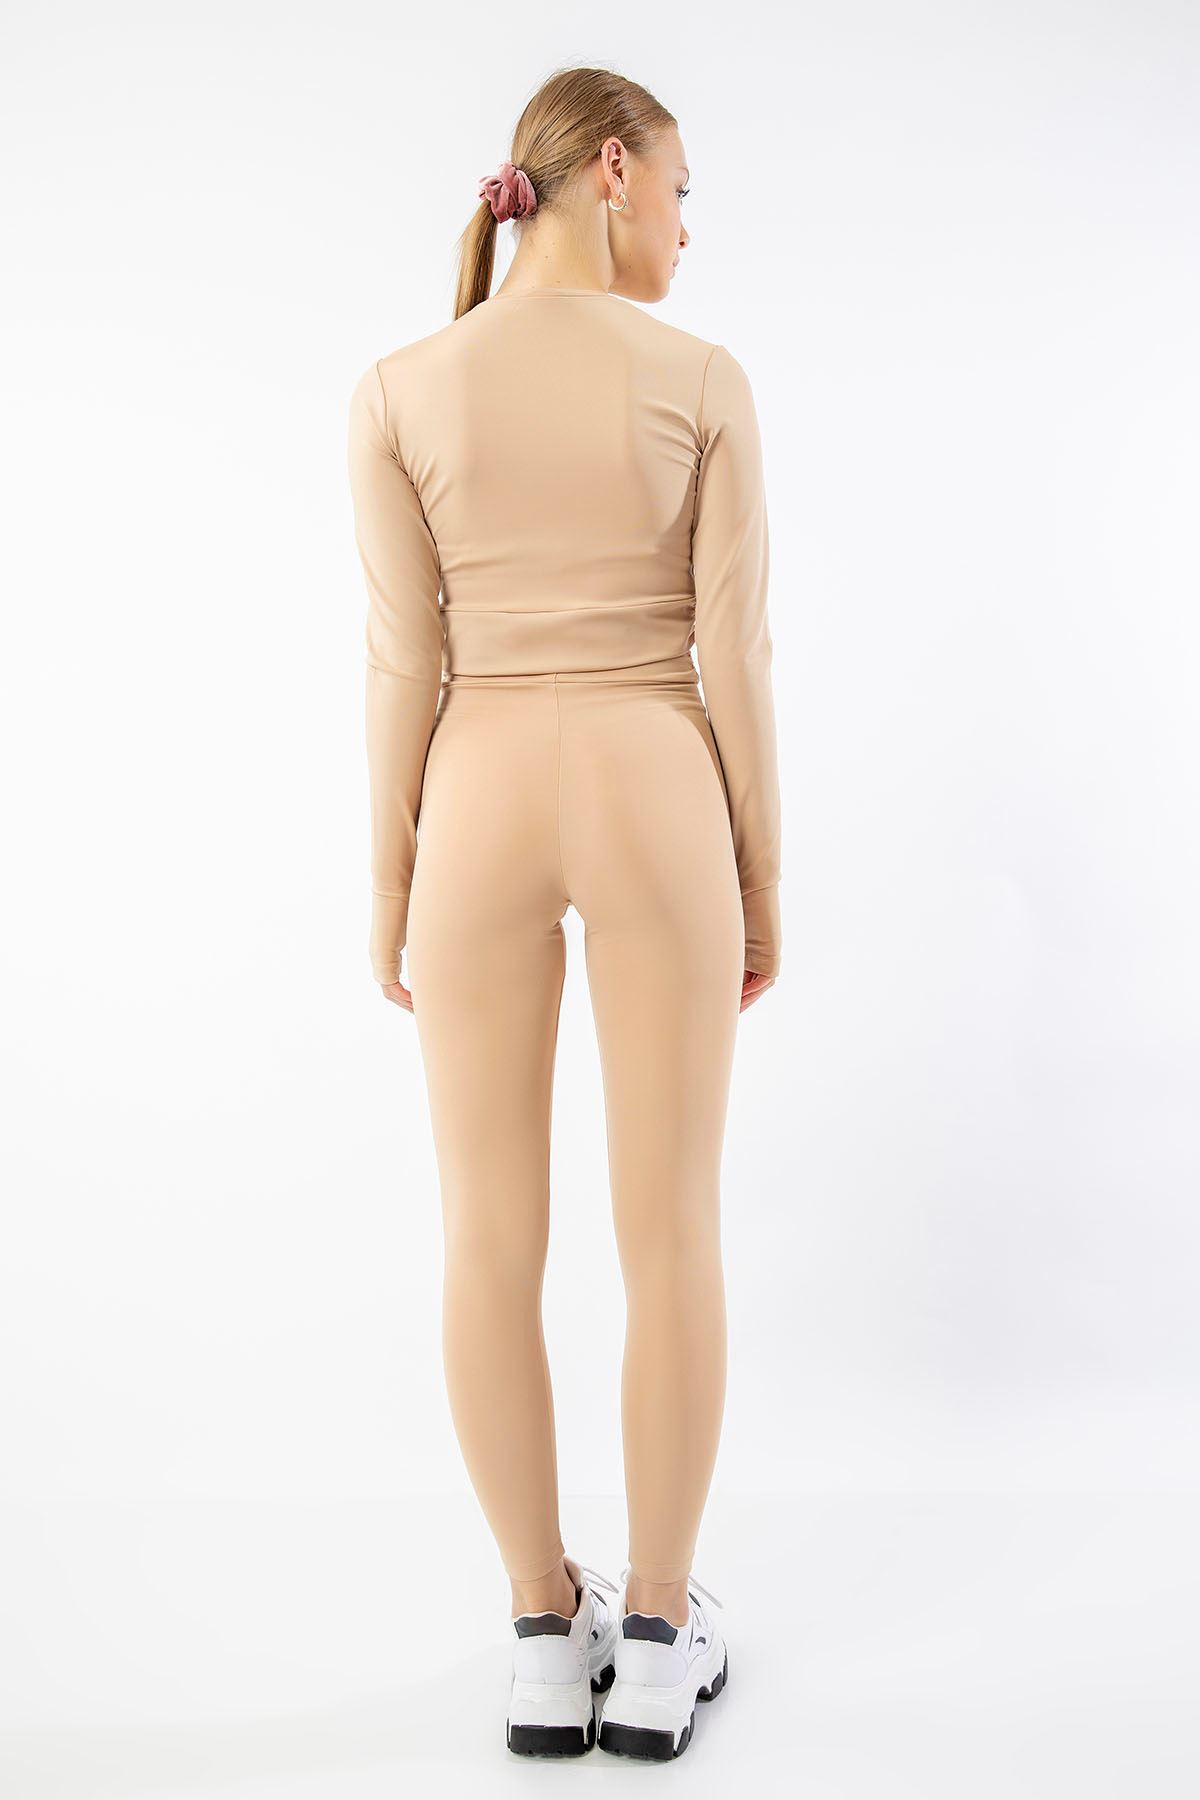 Scuba Fabric Long Shirred Women Tights Collection - Beige 